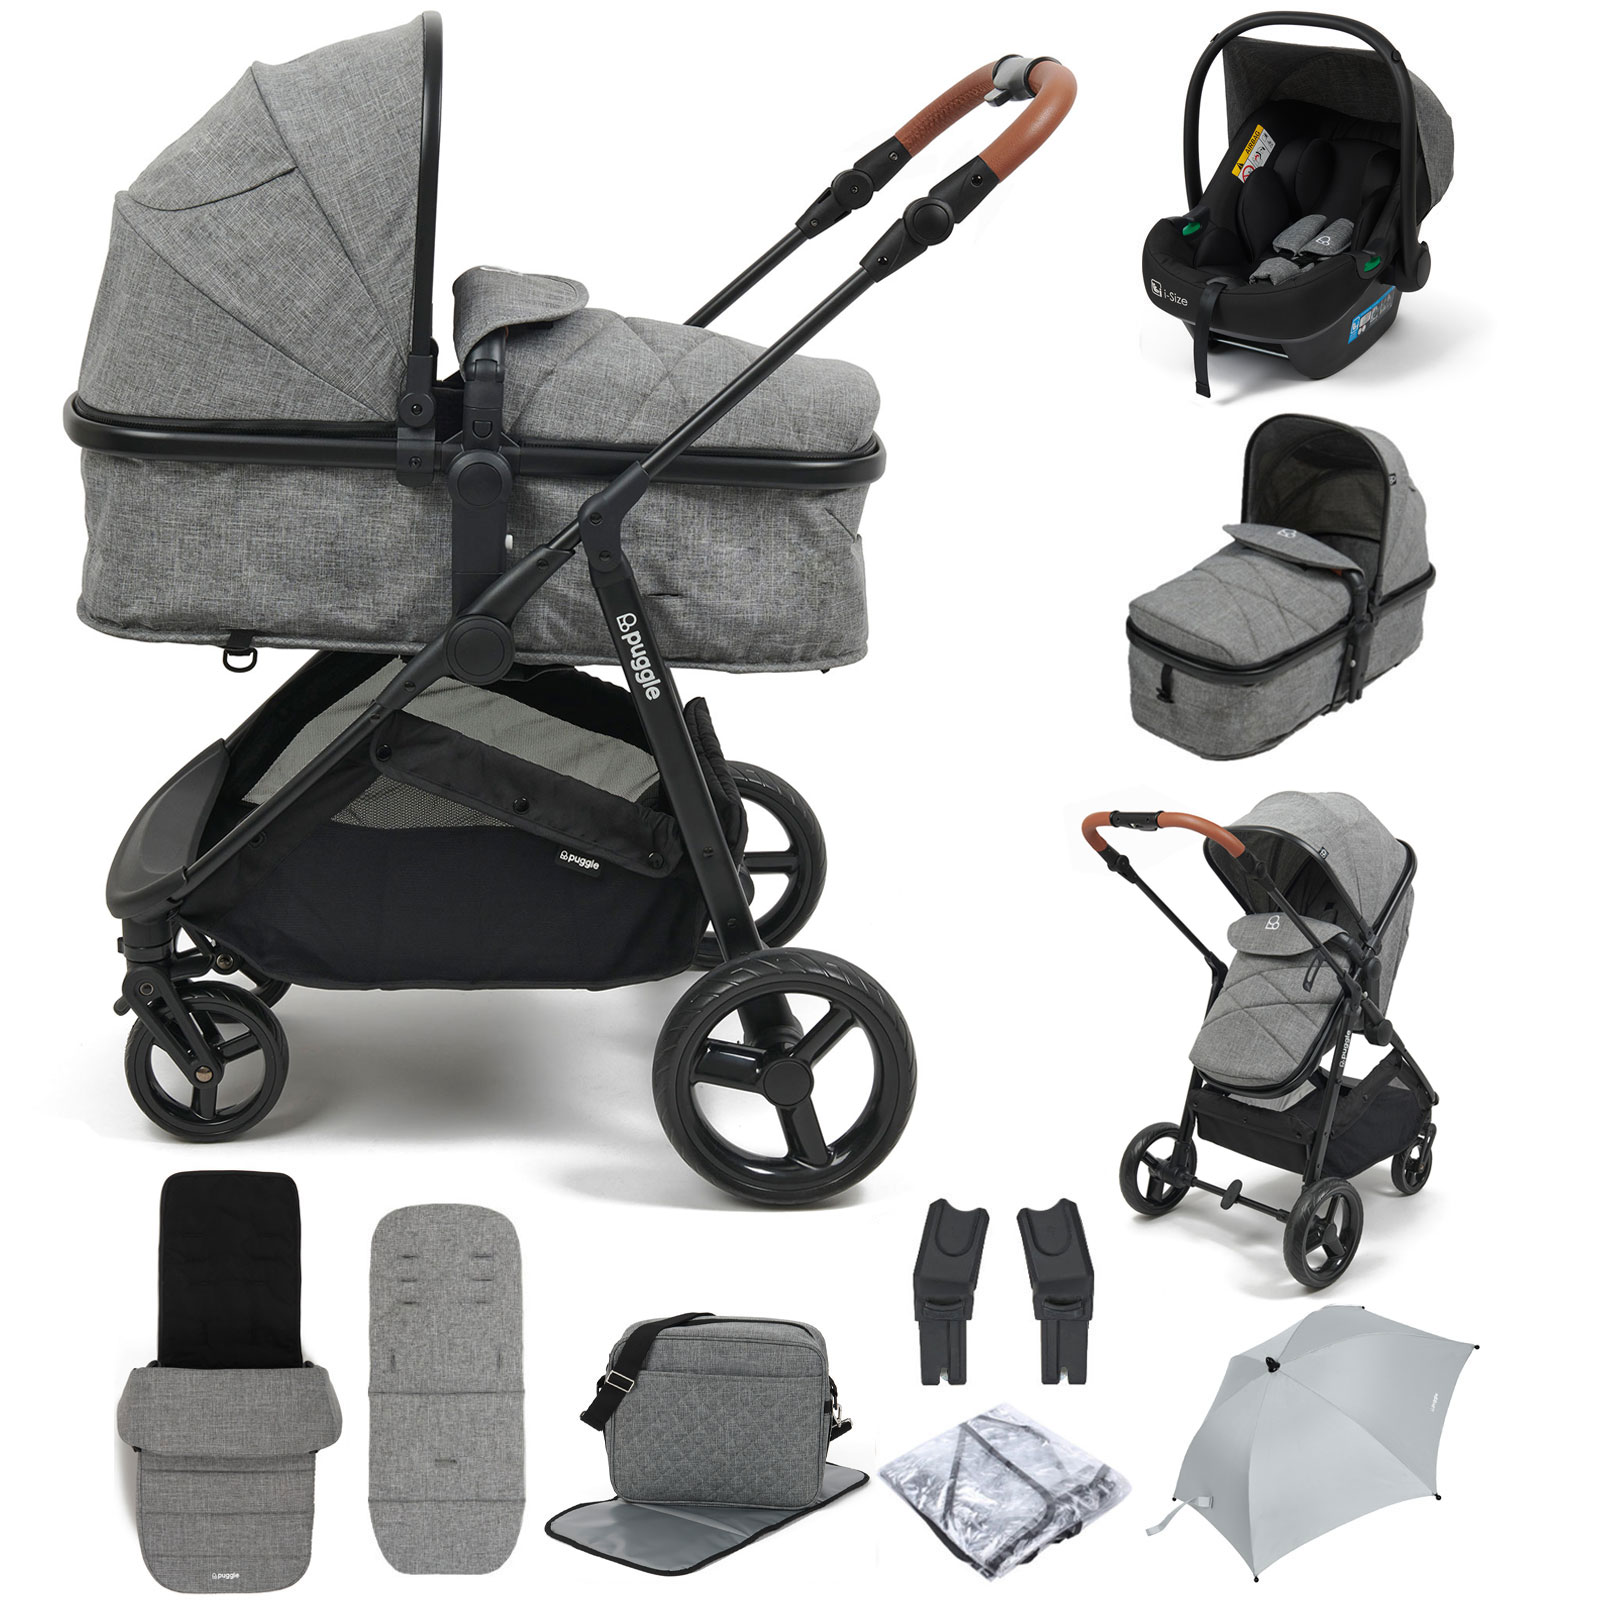 Puggle Monaco XT 2in1 i-Size Travel System with Footmuff, Changing Bag & Parasol - Graphite Grey